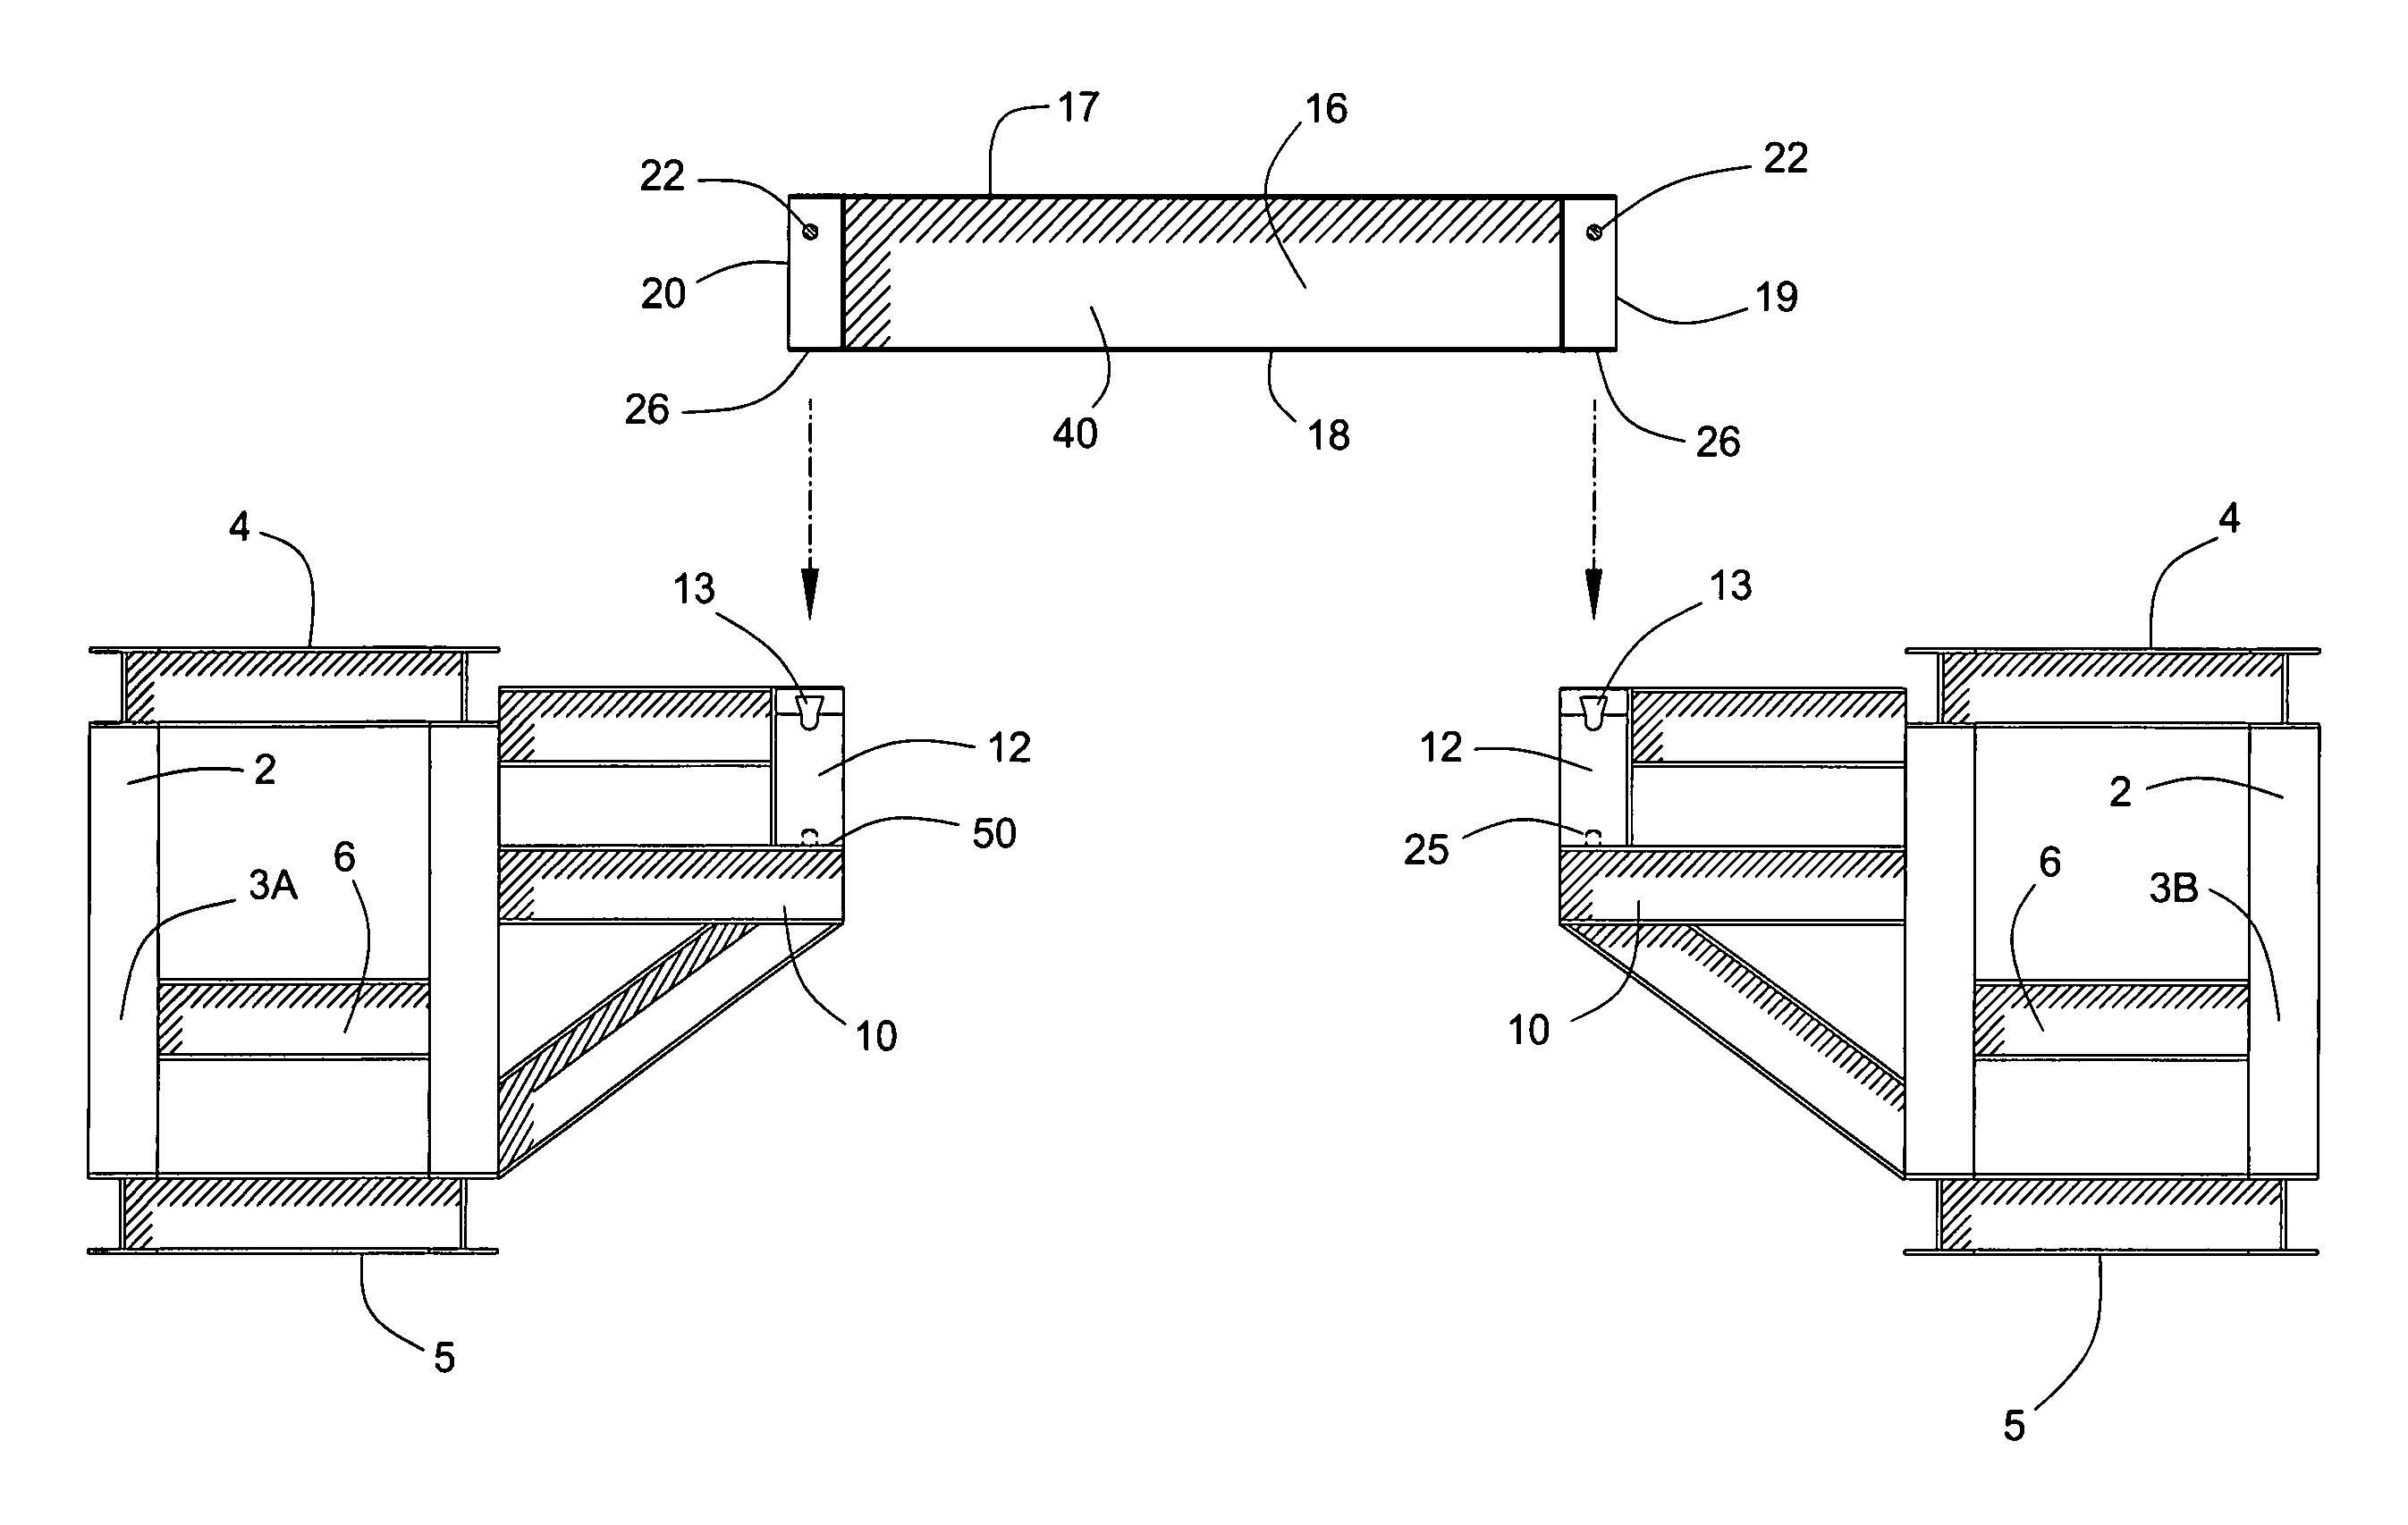 Method and apparatus for constructing drilling platforms without driven pins